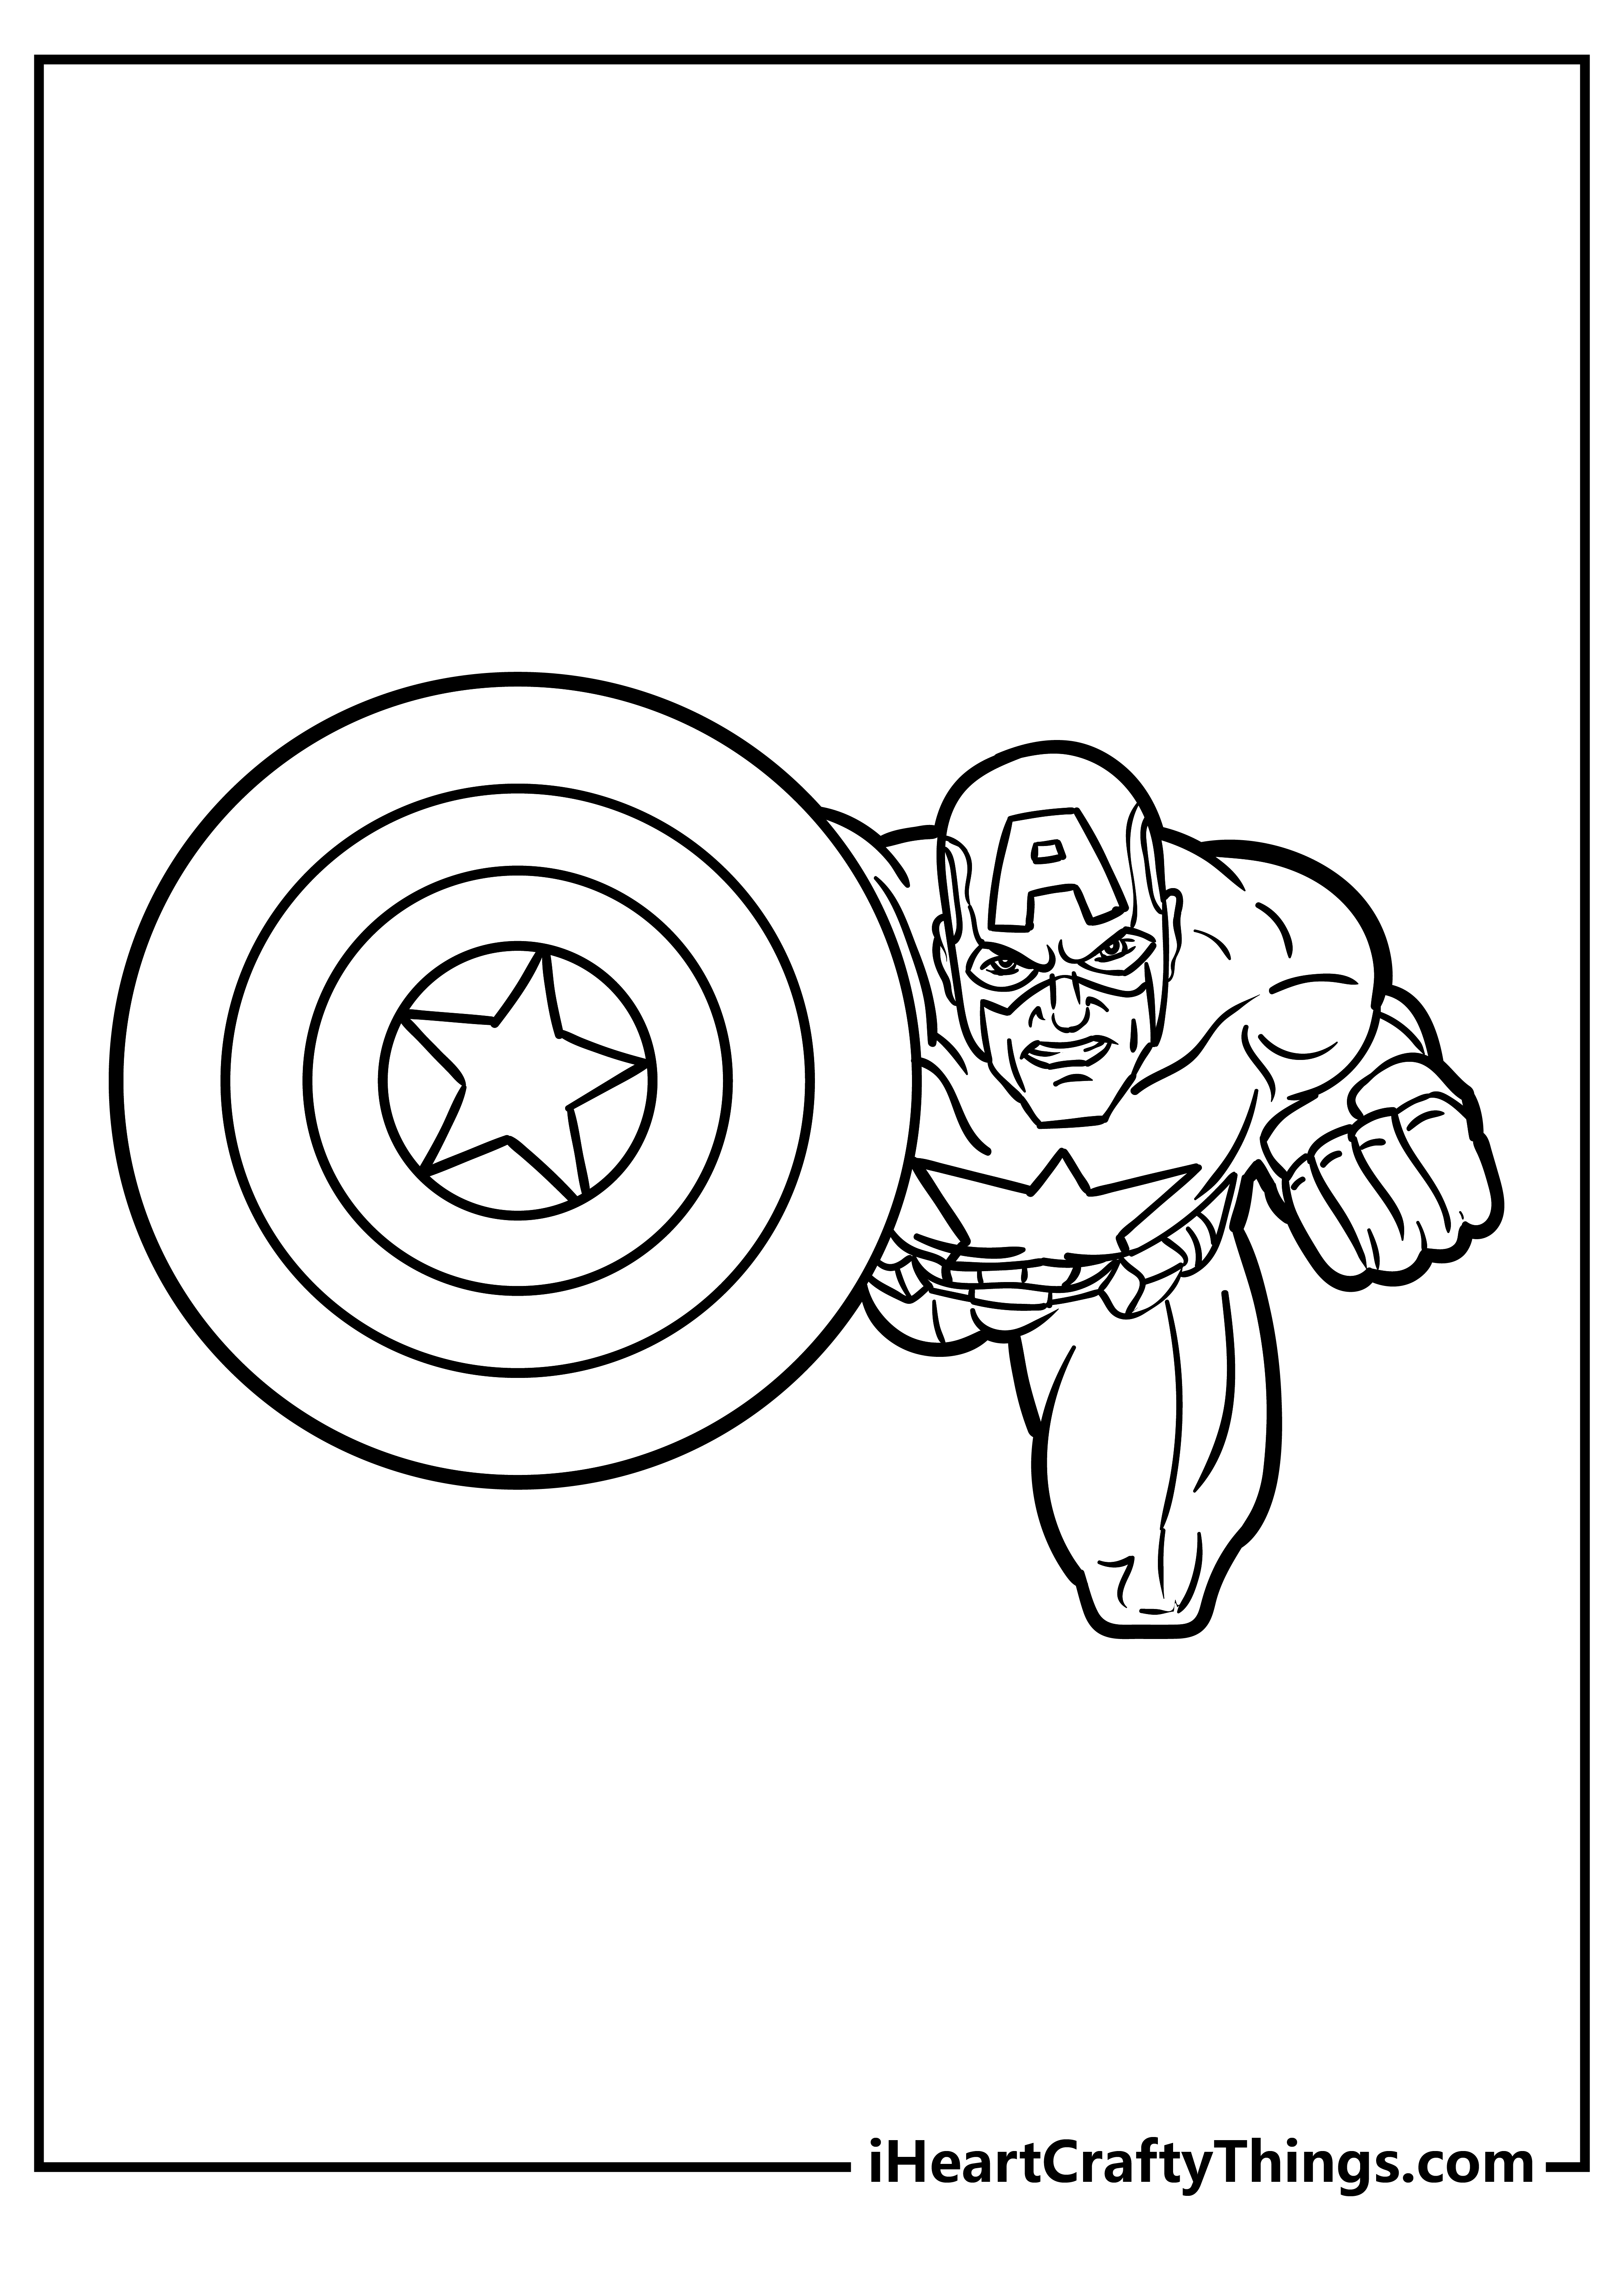 Captain America Coloring Pages for adults free printable